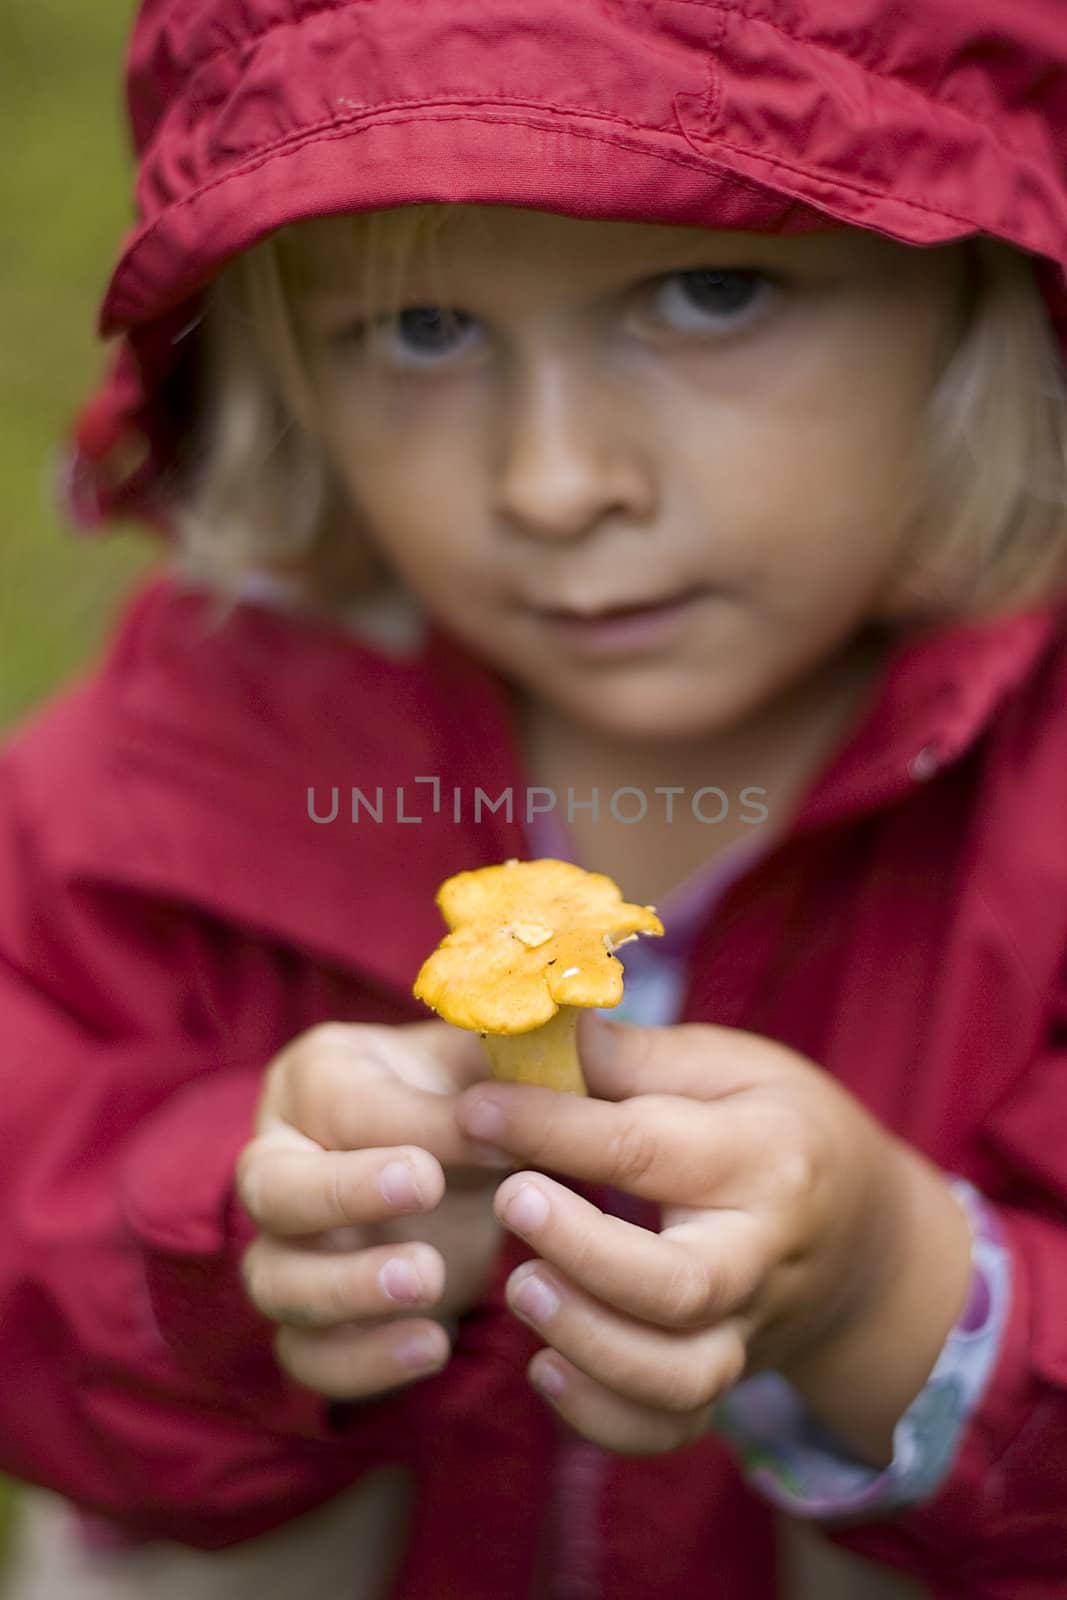 A little girl dressed in a rain coat is holding up a small yellow chanterelle